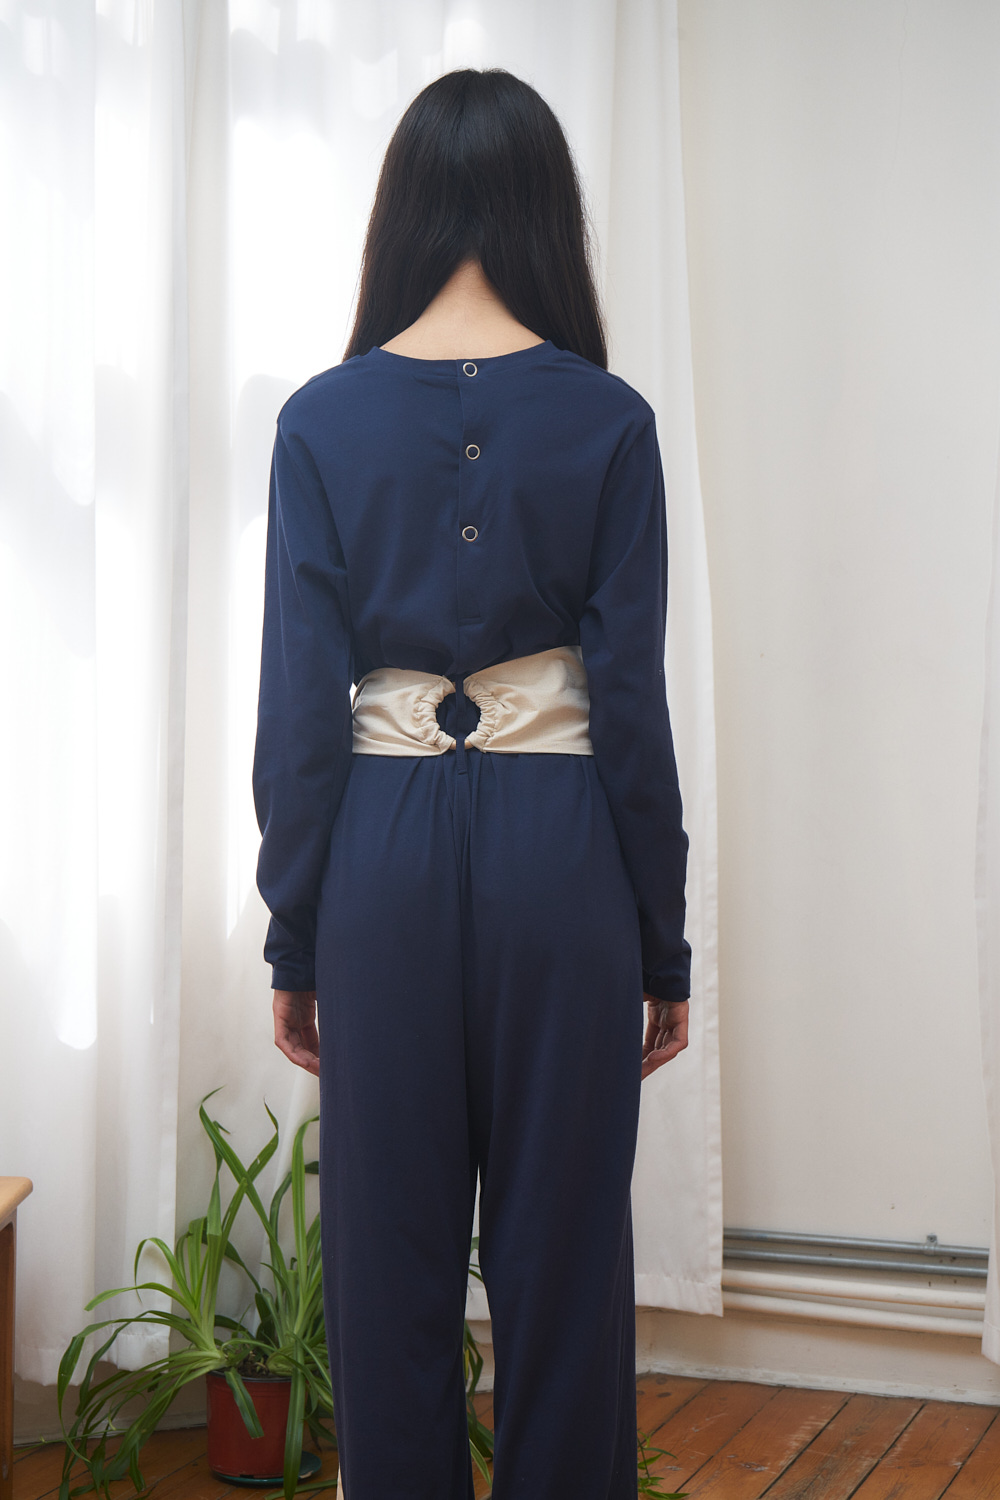 ahu jumpsuit dark blue jersey fabric with push-button closure on the backside.